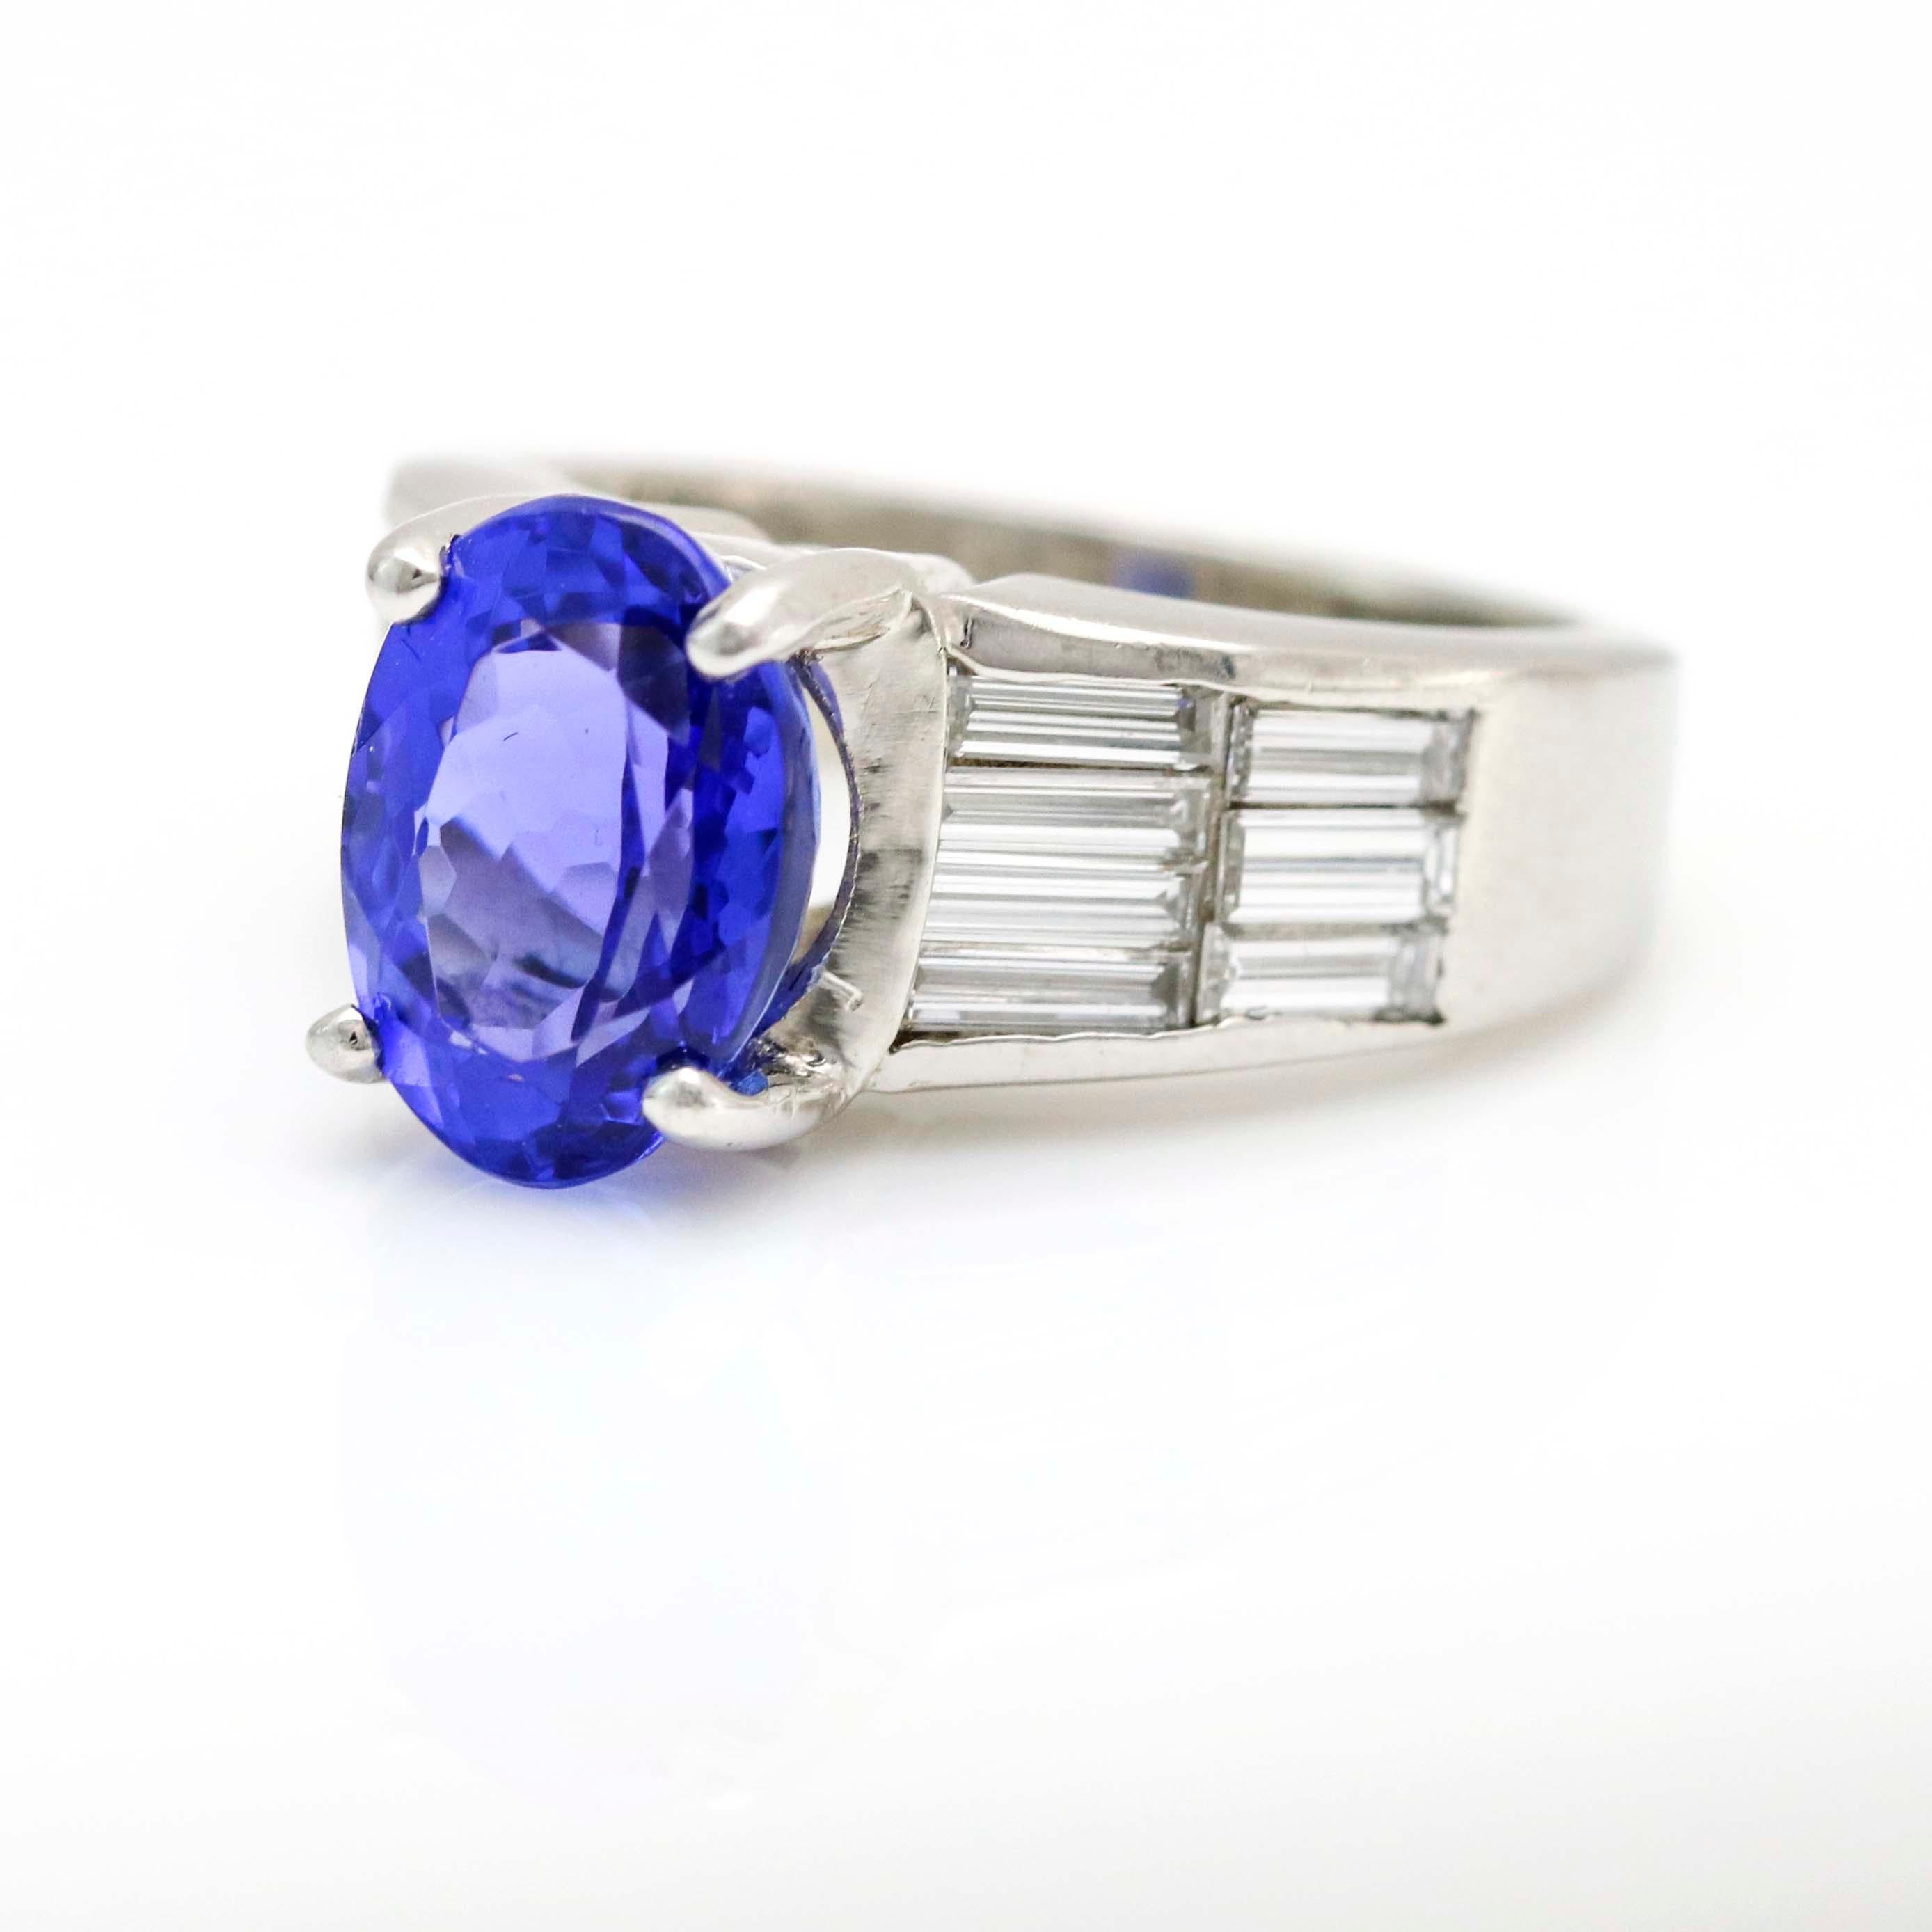 Retro oval Tanzanite cocktail ring with baguette cut diamonds side stone crafted of platinum. Estimated diamond total carat weight, 1 carat. Tanzanite, 10.5mm x 7mm x 6mm. Height from finger, 8mm. Size 5. Signed ADJ.